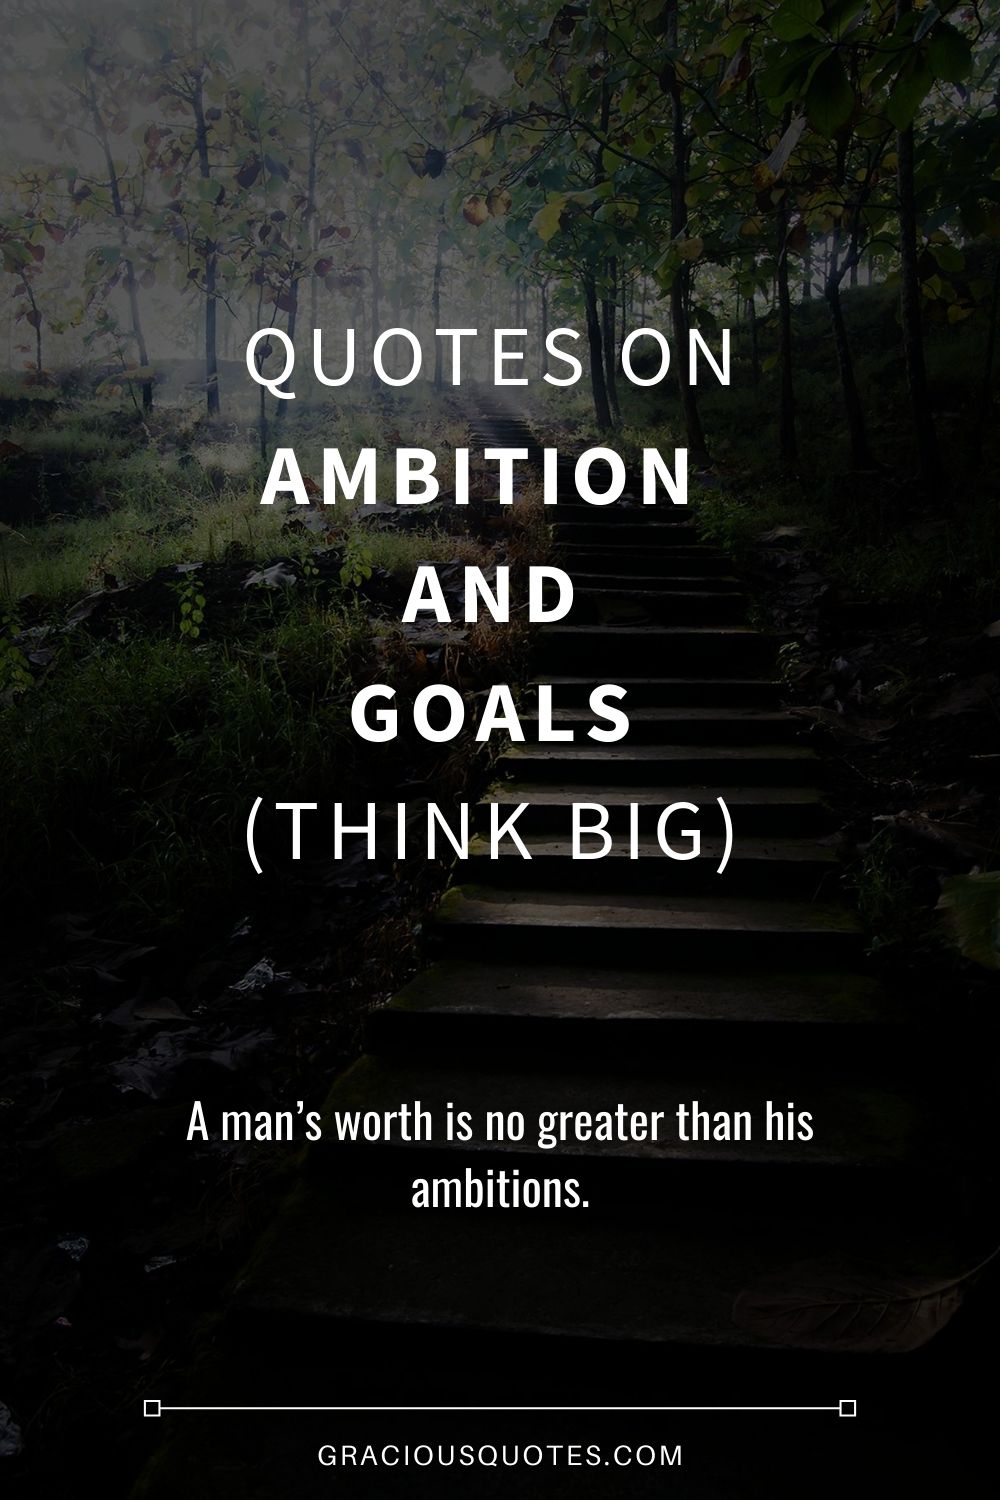 Quotes on Ambition and Goals (THINK BIG) - Gracious Quotes